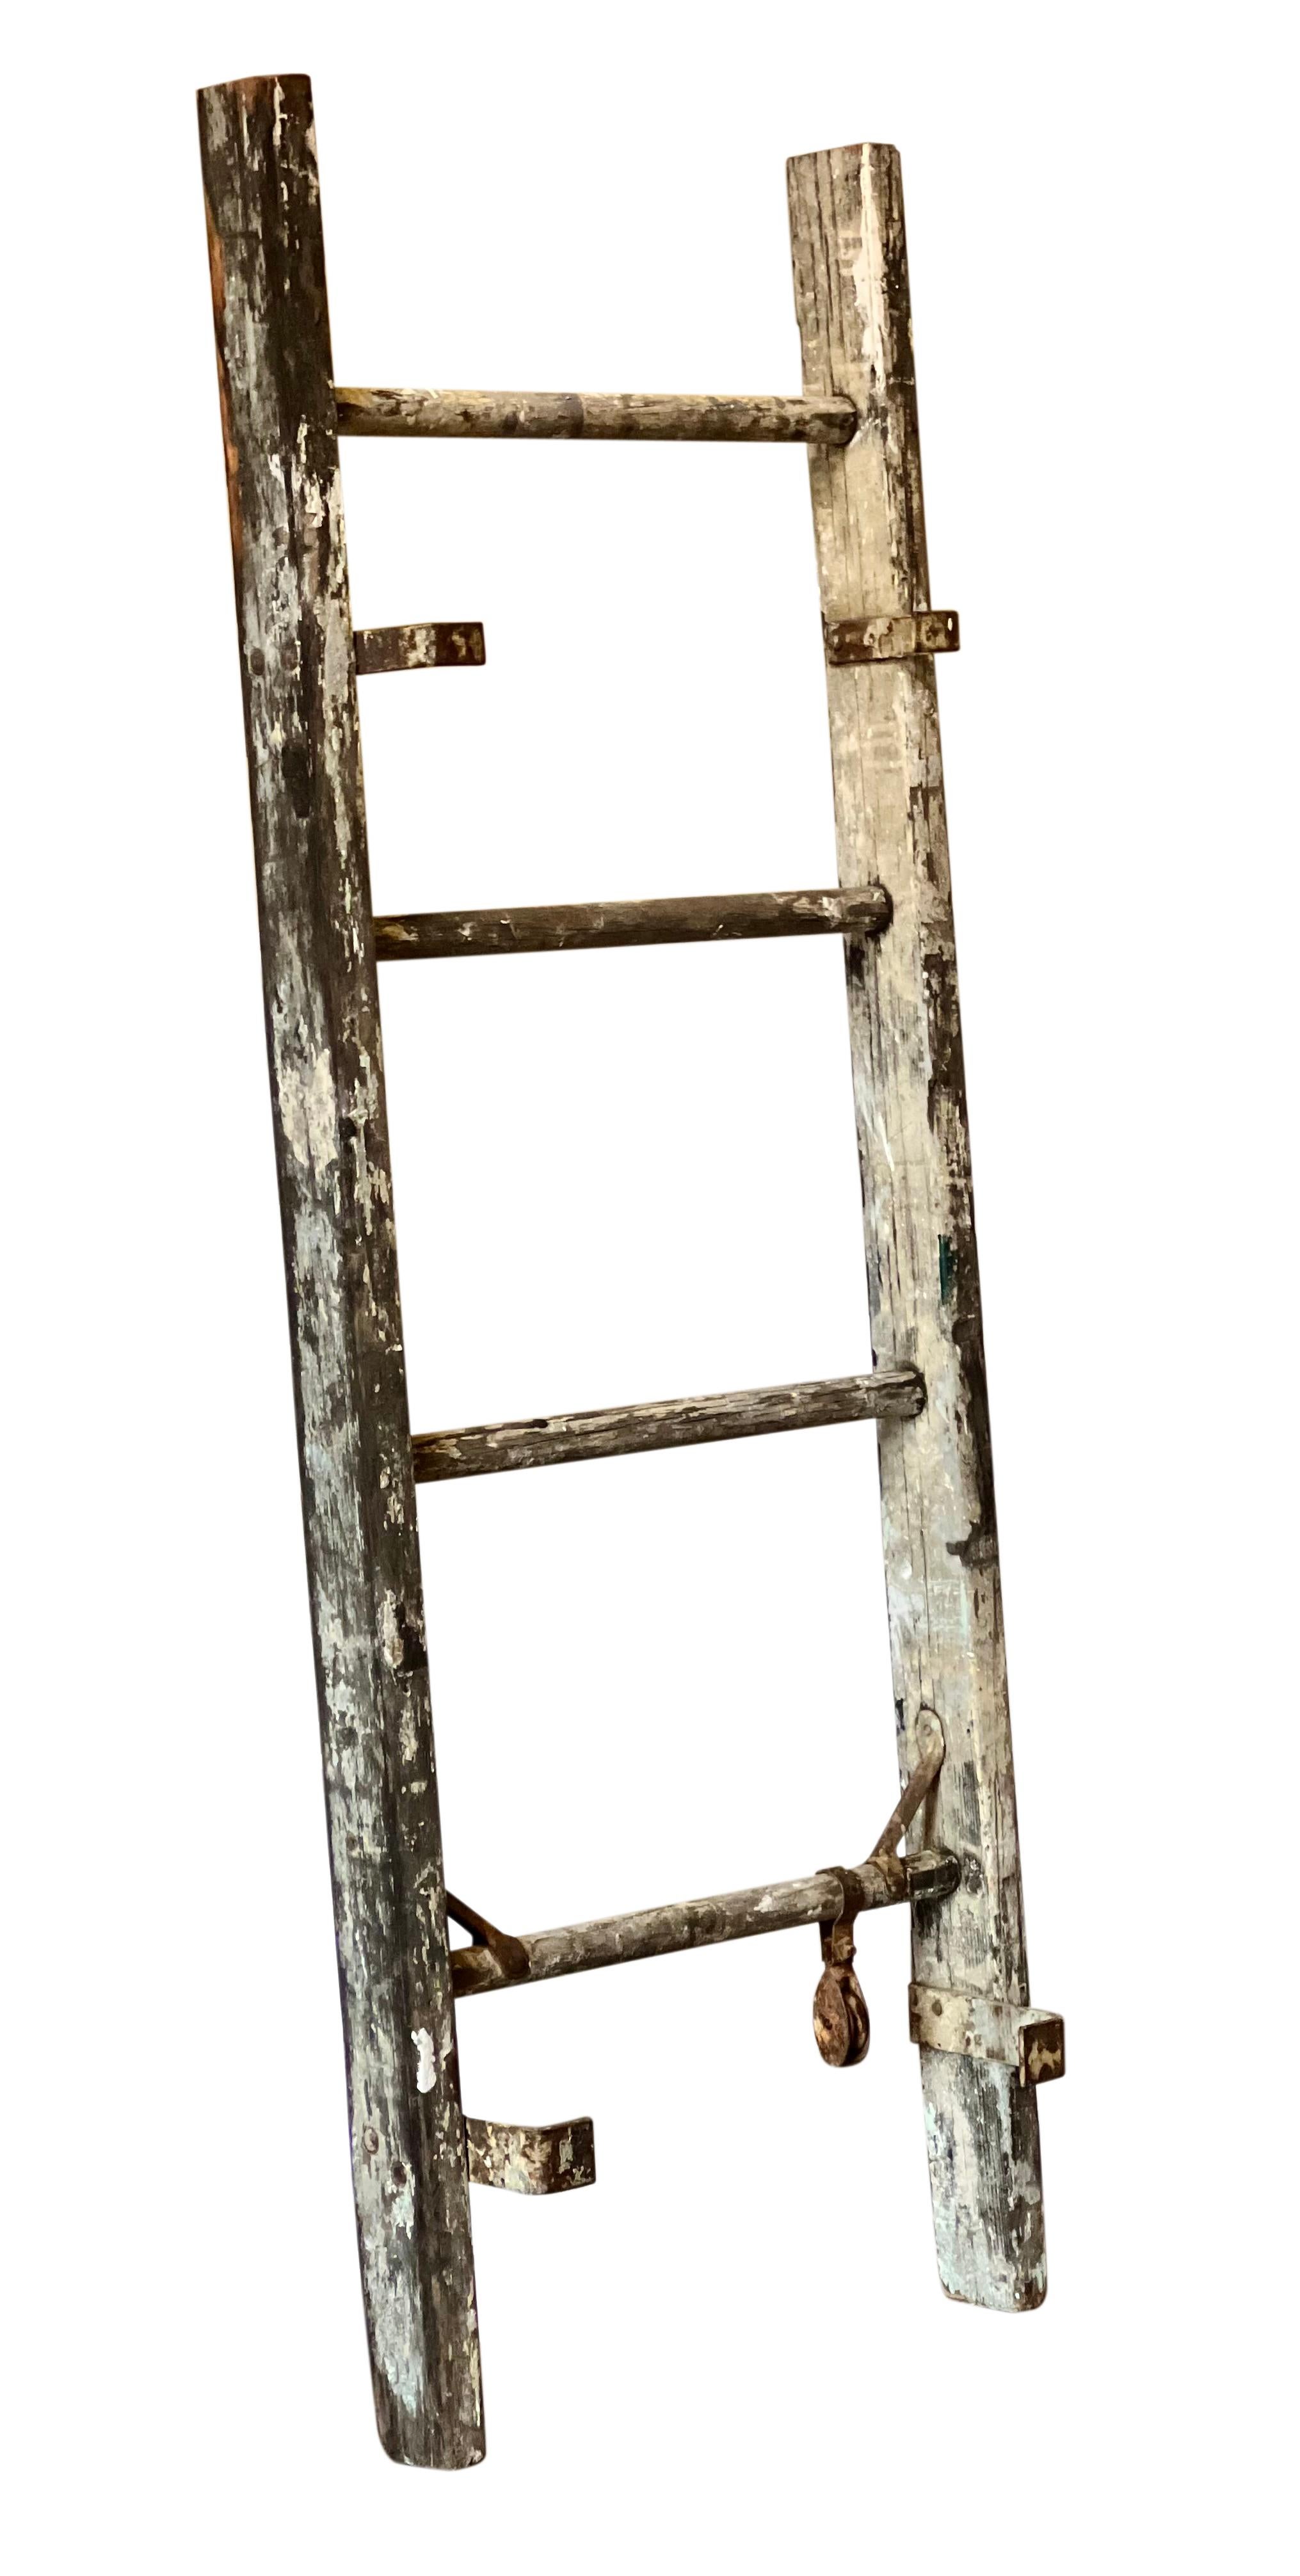 Antique rustic primitive wood ladder, c. 1910-1920.

Charming, weathered ladder with original paint in shades of white and gray with hints of pale blue, green and yellow.. It retains the original hardware and may have been a section of a painter's